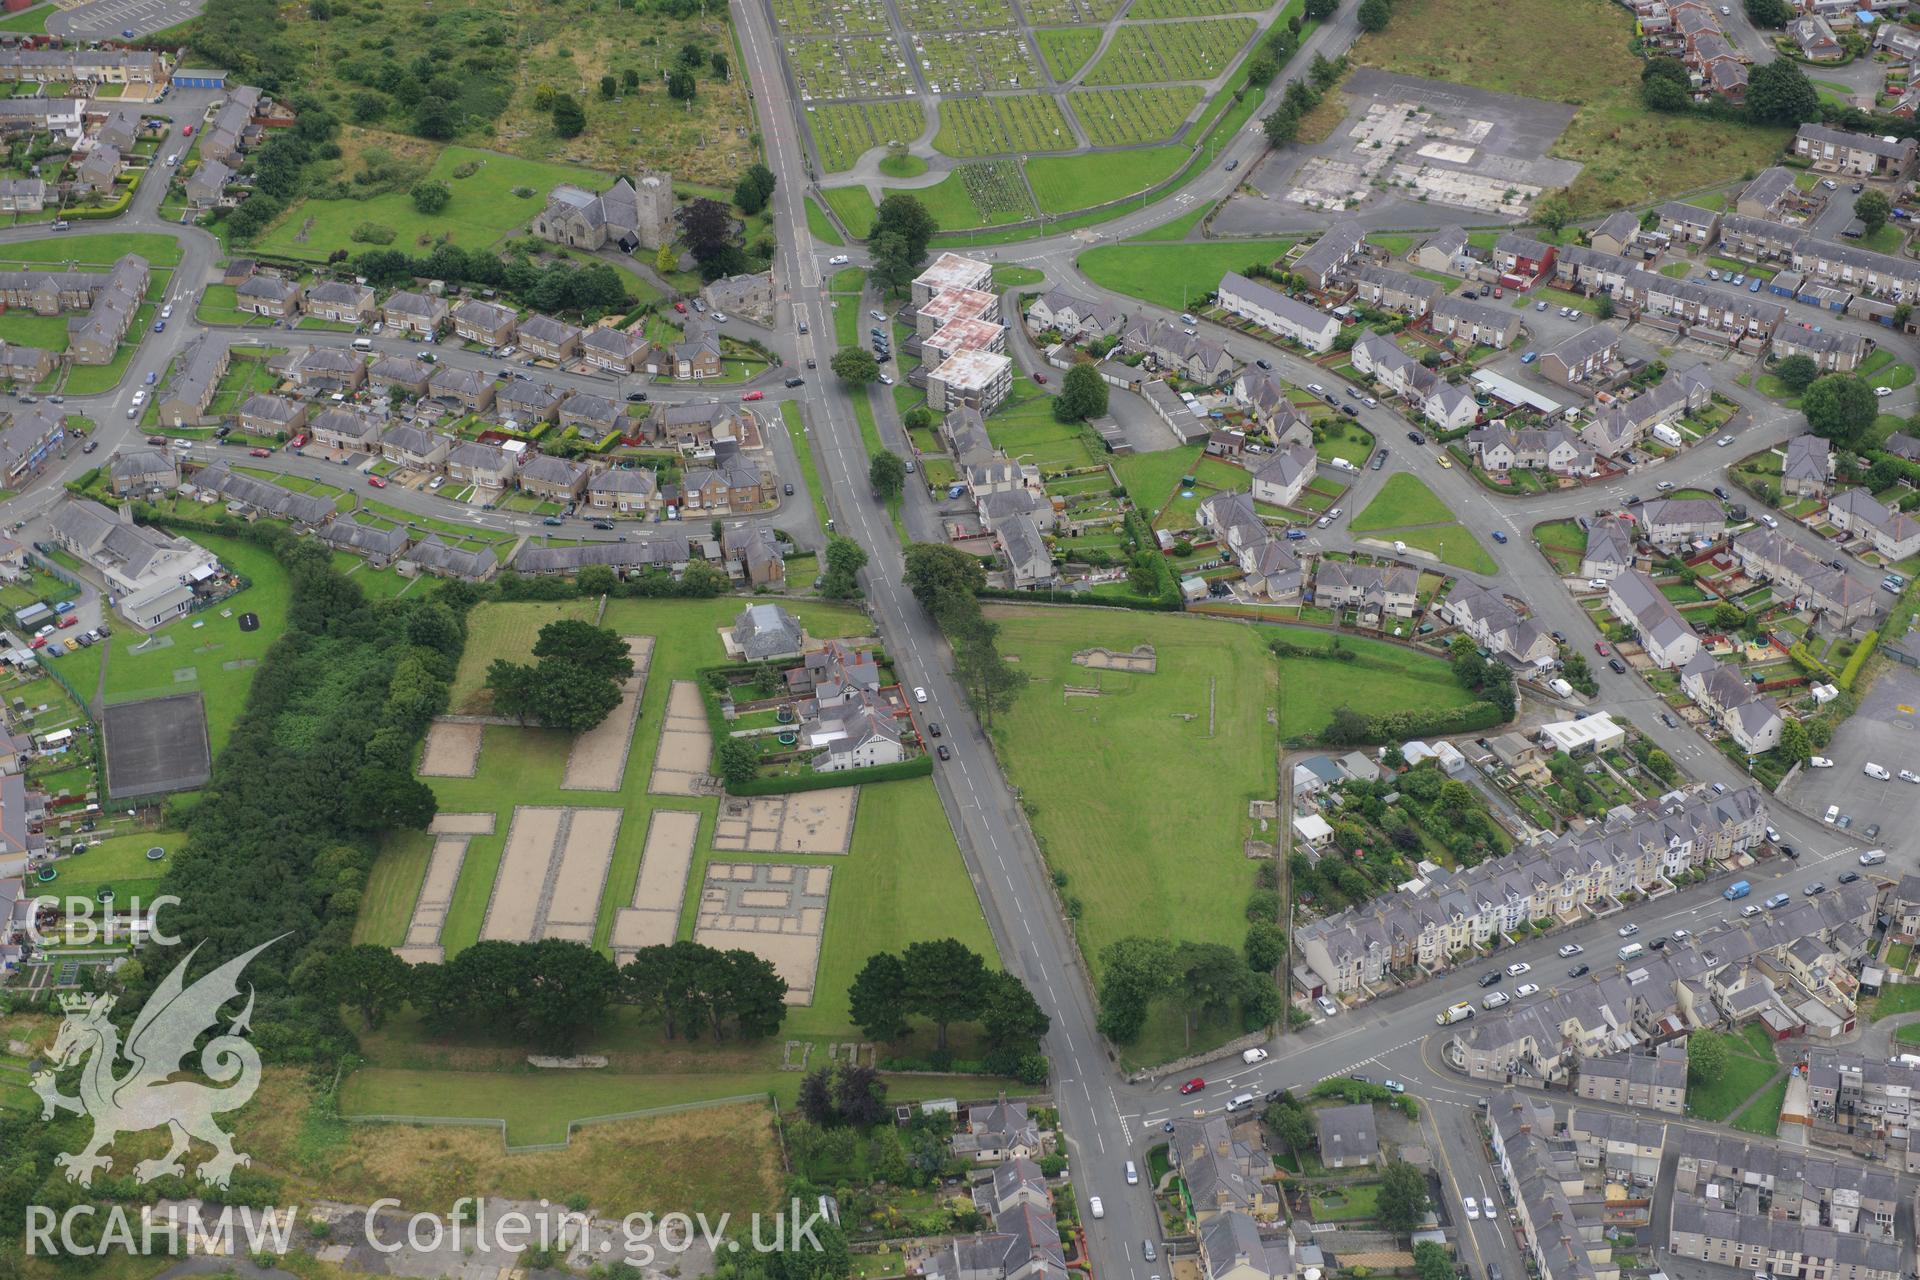 Site of Roman burial ground; section of Roman road from Caerhun to Caernarfon and Segontium Roman military settlement, Caernarfon. Oblique aerial photograph taken during the Royal Commission's programme of archaeological aerial reconnaissance by Toby Driver on 30th July 2015.